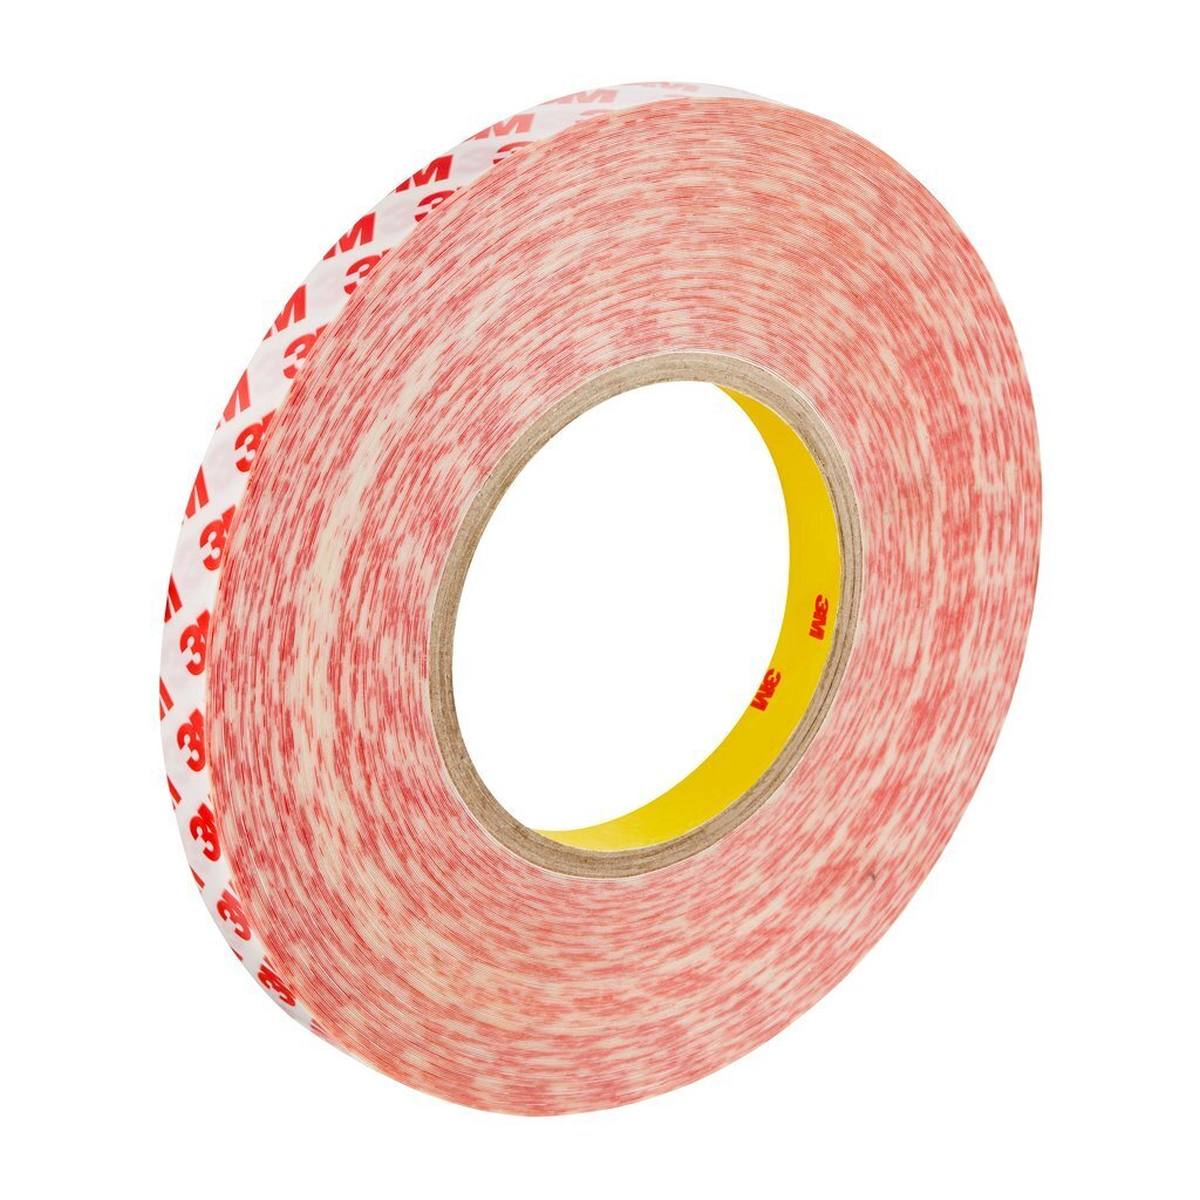 3M Double-sided adhesive tape with polyester backing GPT-020F, transparent, 12 mm x 50 m, 0.202 mm